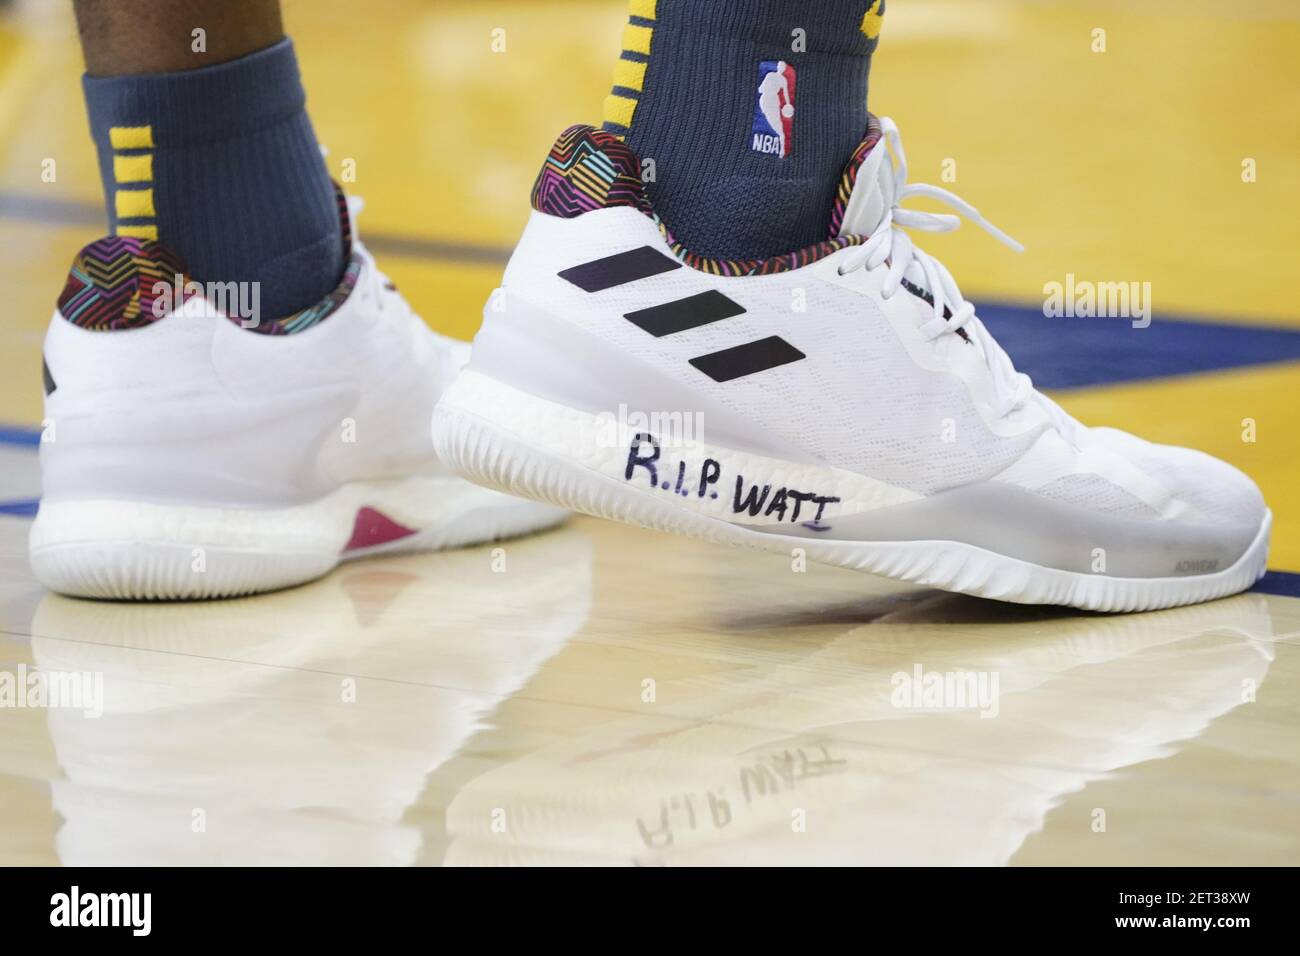 November 24, 2018; Oakland, CA, USA; Detail view of Adidas shoes worn by  Golden State Warriors forward Kevon Looney (5) during the second quarter  against the Sacramento Kings at Oracle Arena. Mandatory